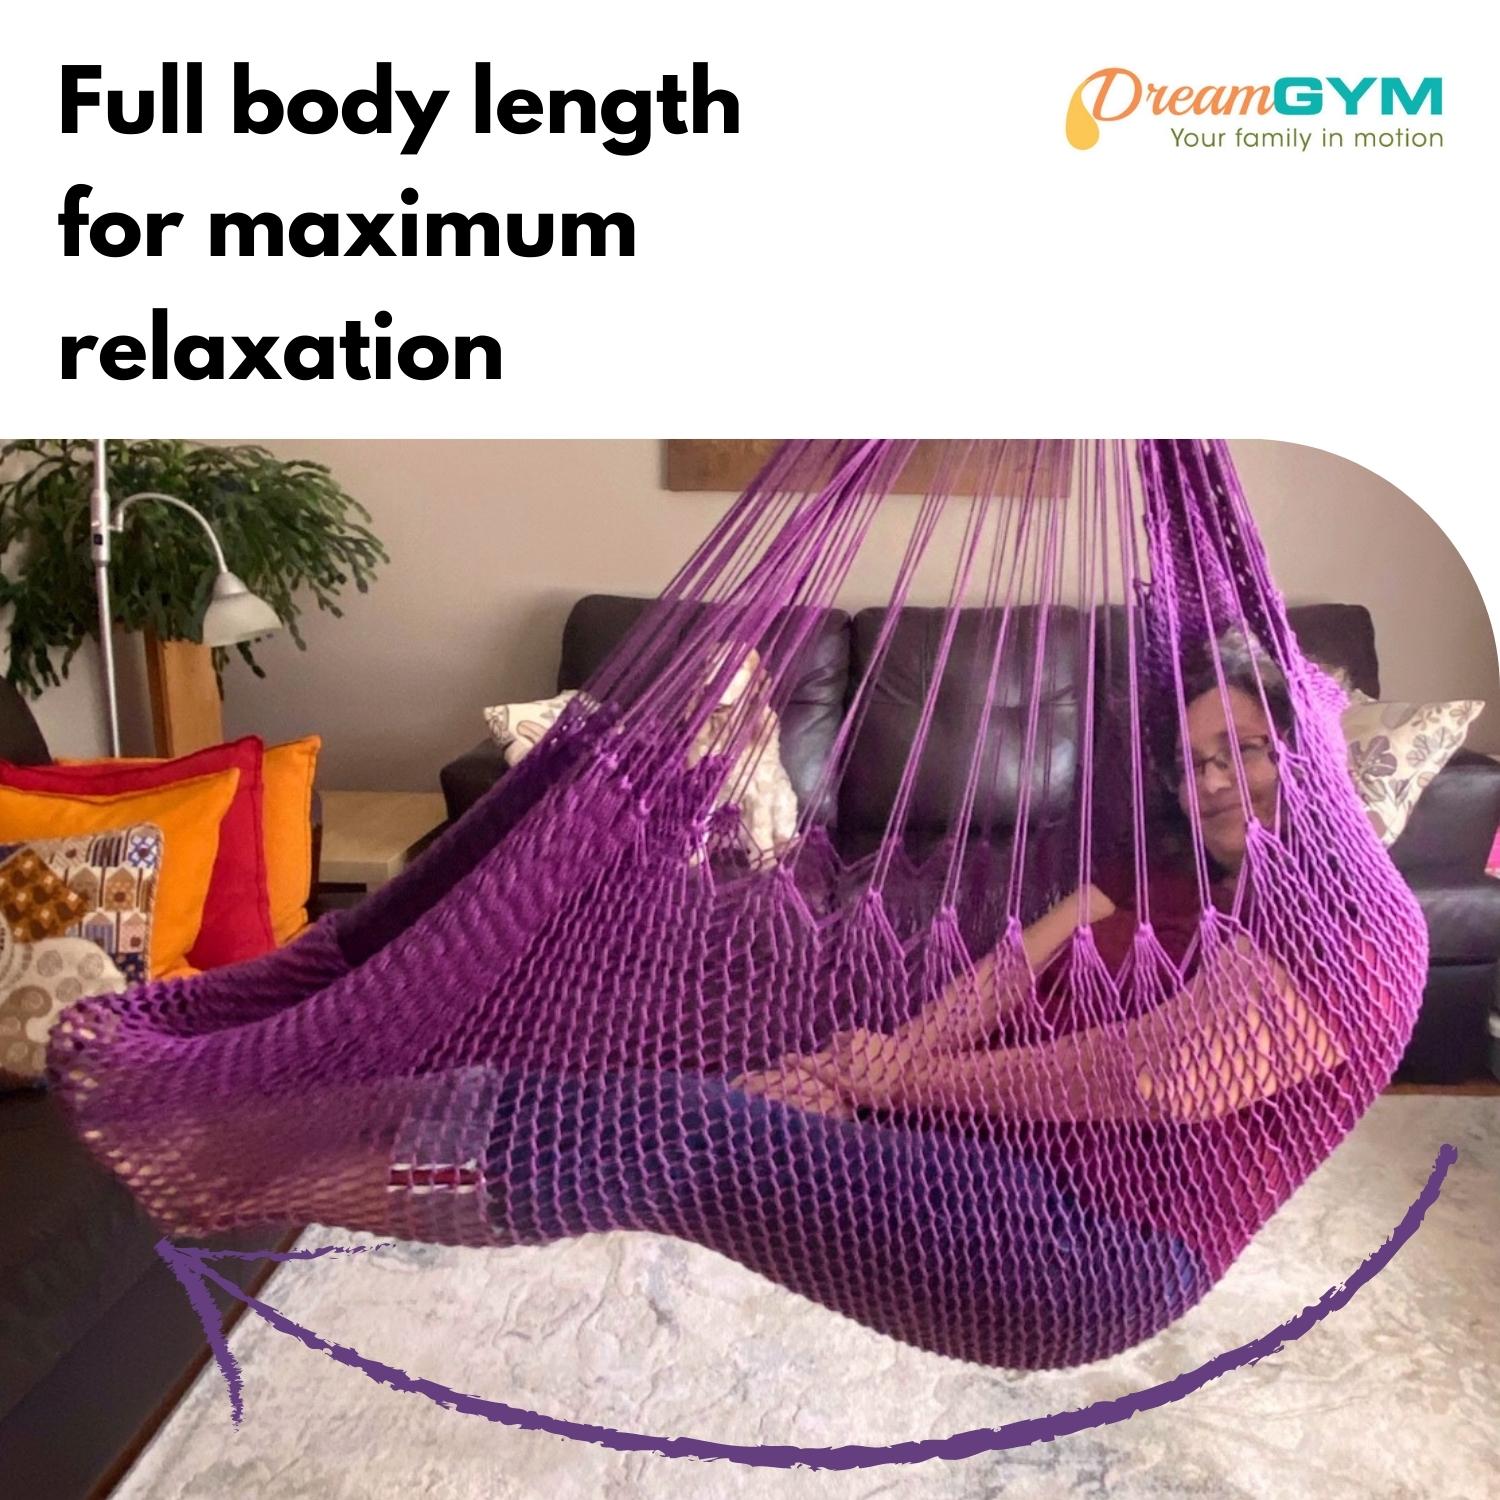 A woman is resting in a hammock swing. It provides full body length for maximum relaxation. Beautiful violet colour.